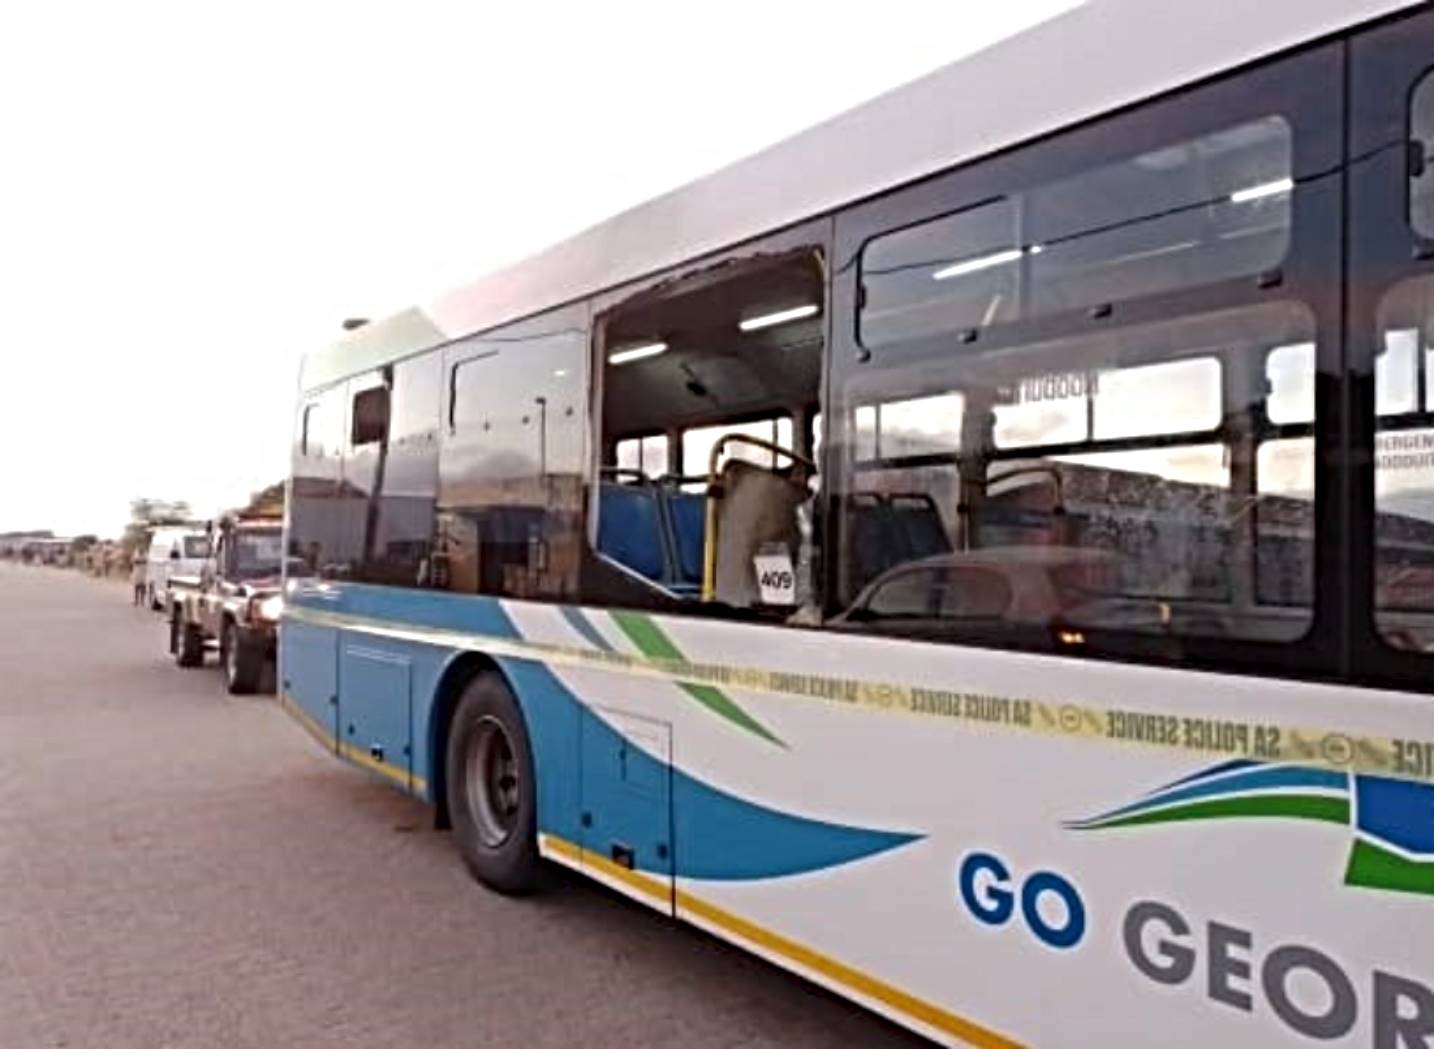 The Go George bus that was targeted in a petrol bomb attack on 1 March 2023.